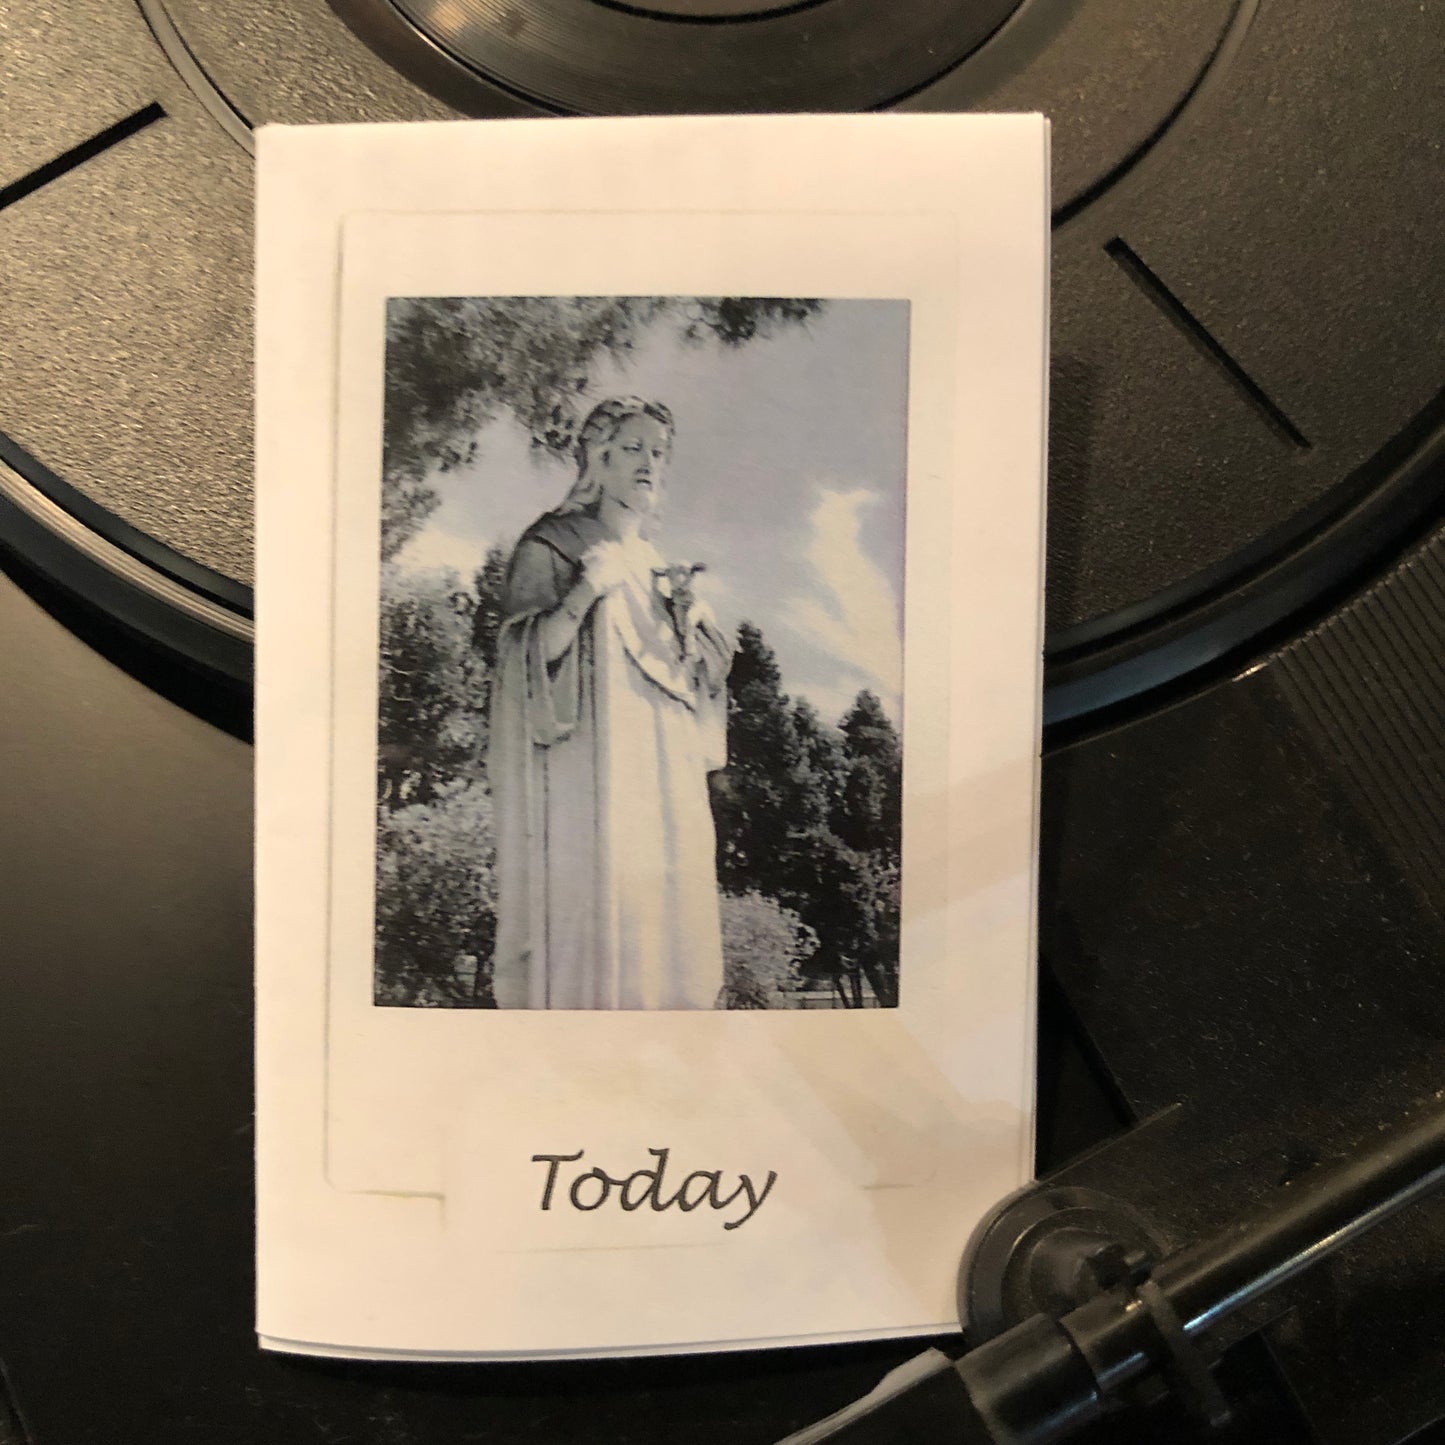 Kendy Paxia "Cemetery Photography: Today" Zine Series